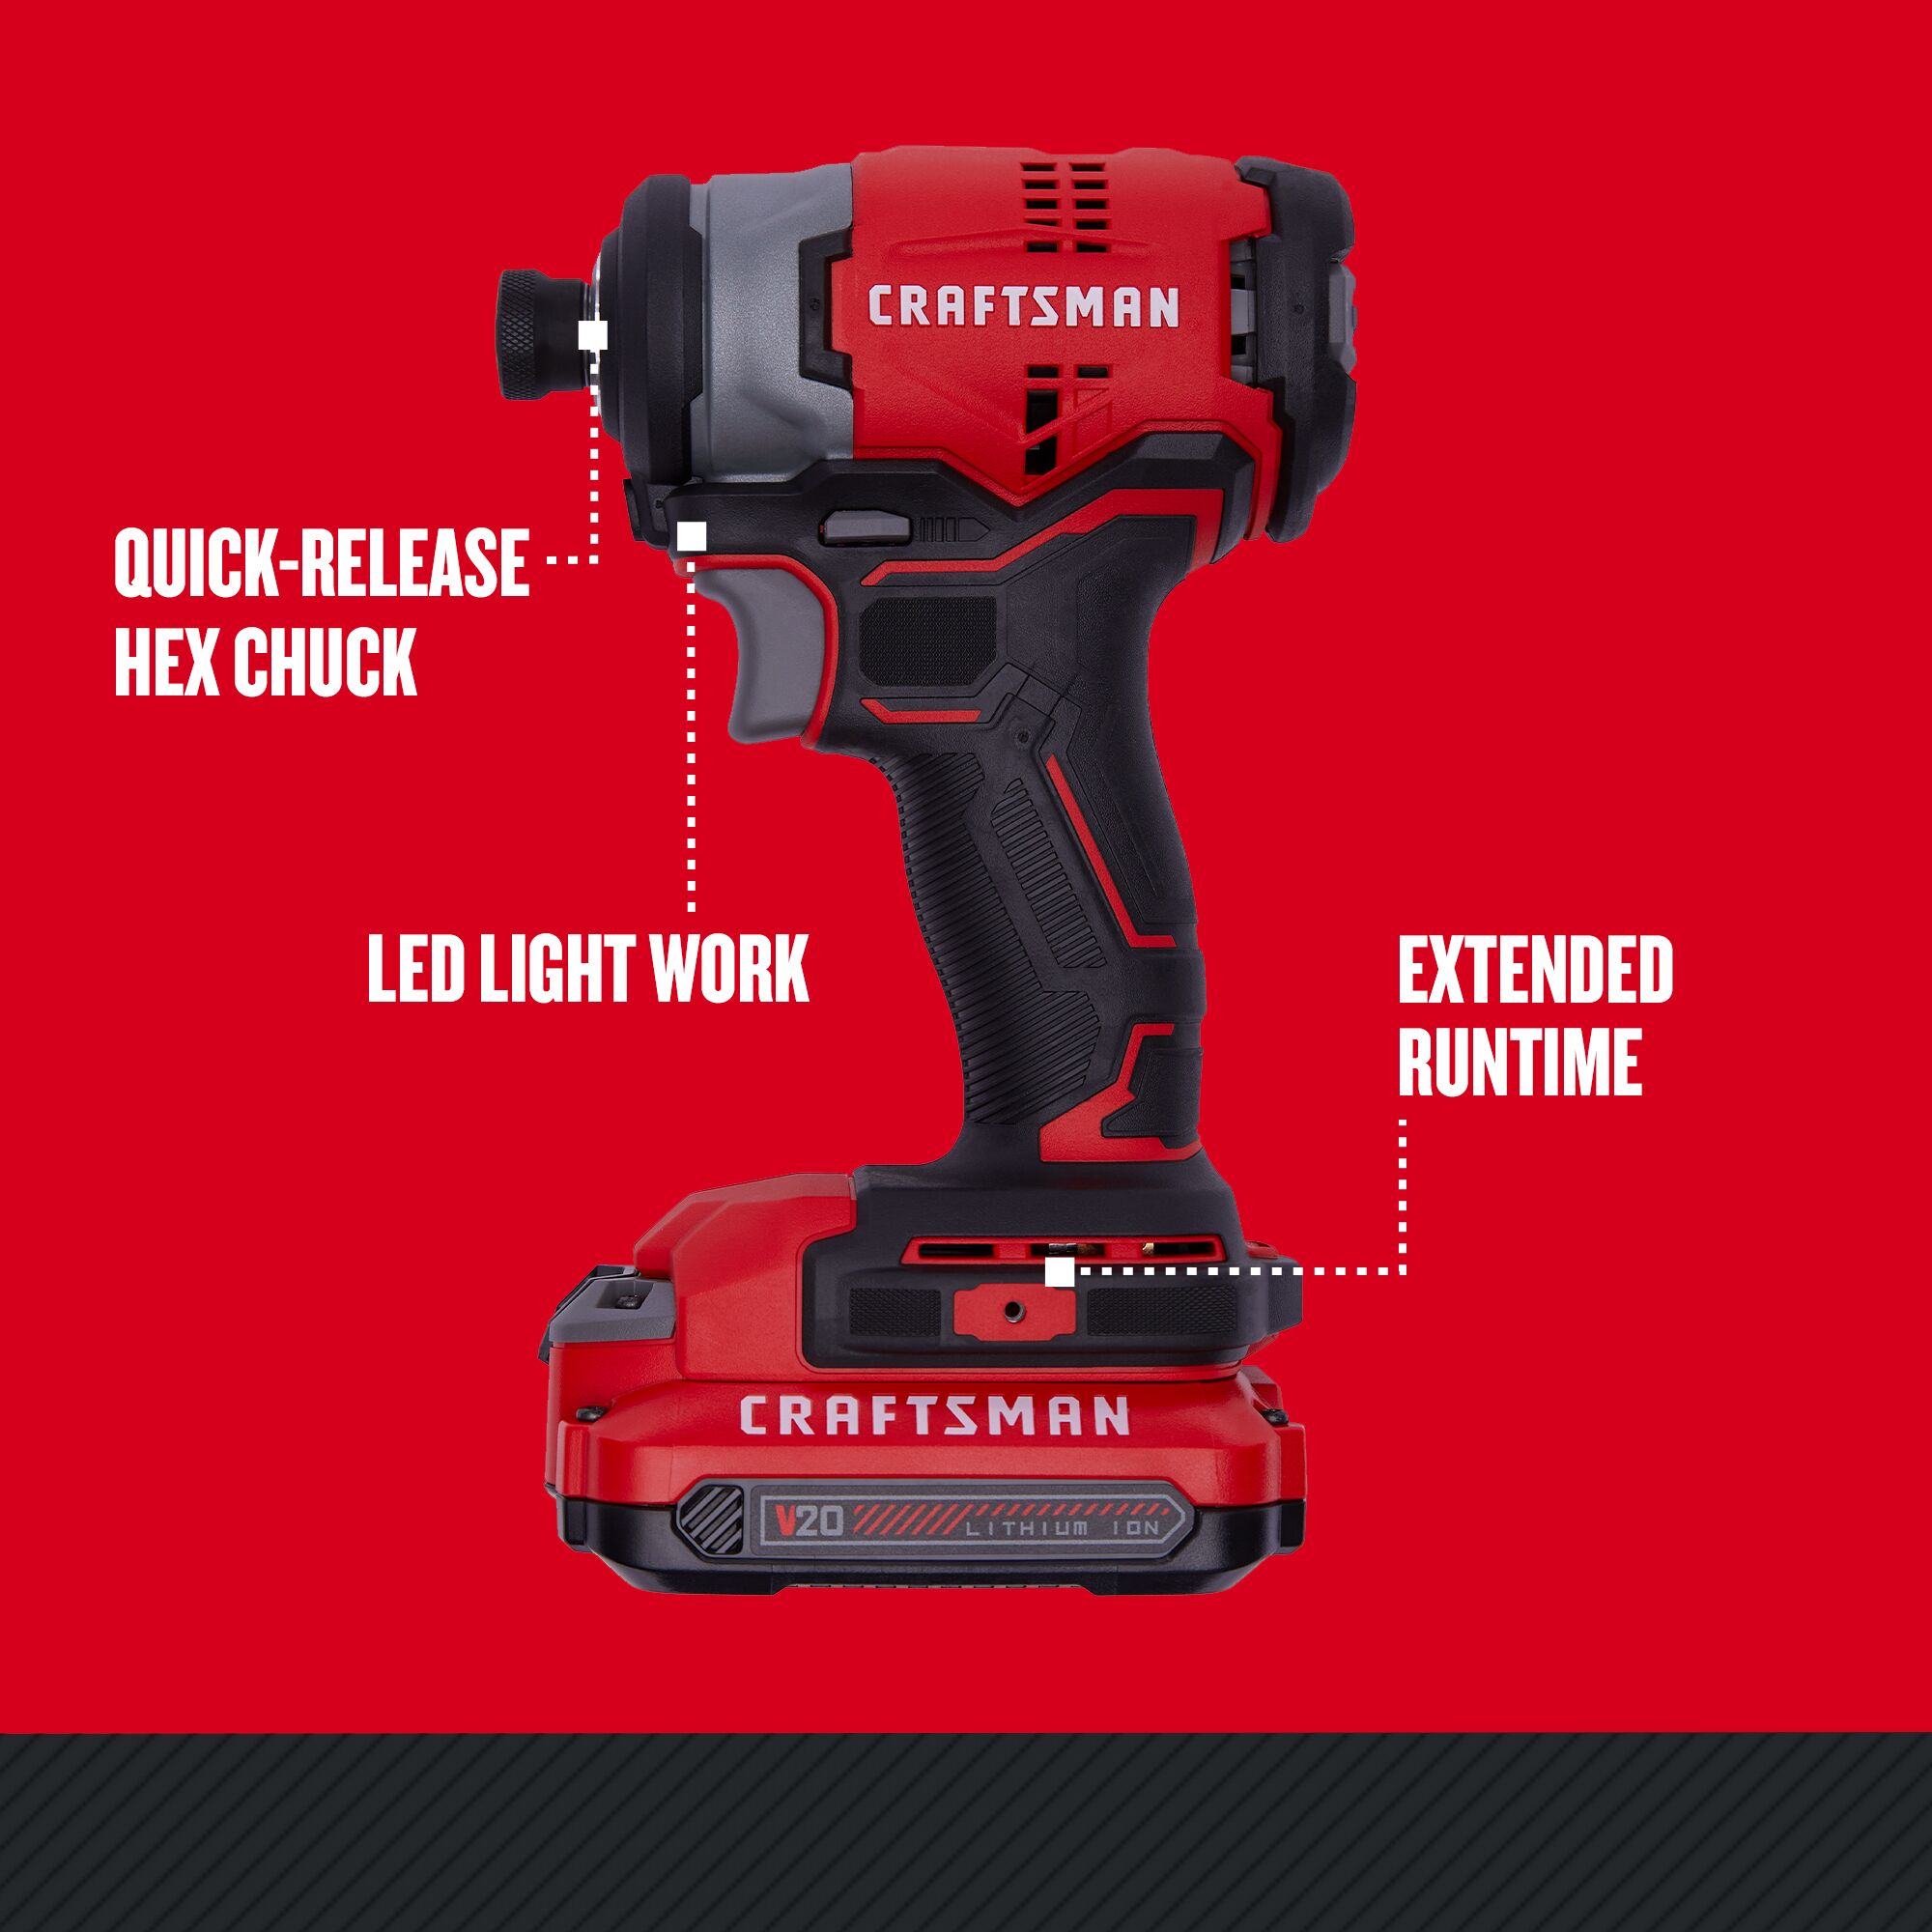 Side View of Craftsman 20V Max ¼ in. Brushless Cordless Impact Driver showing quick-release hex chuck, LED light work and extended runtime.